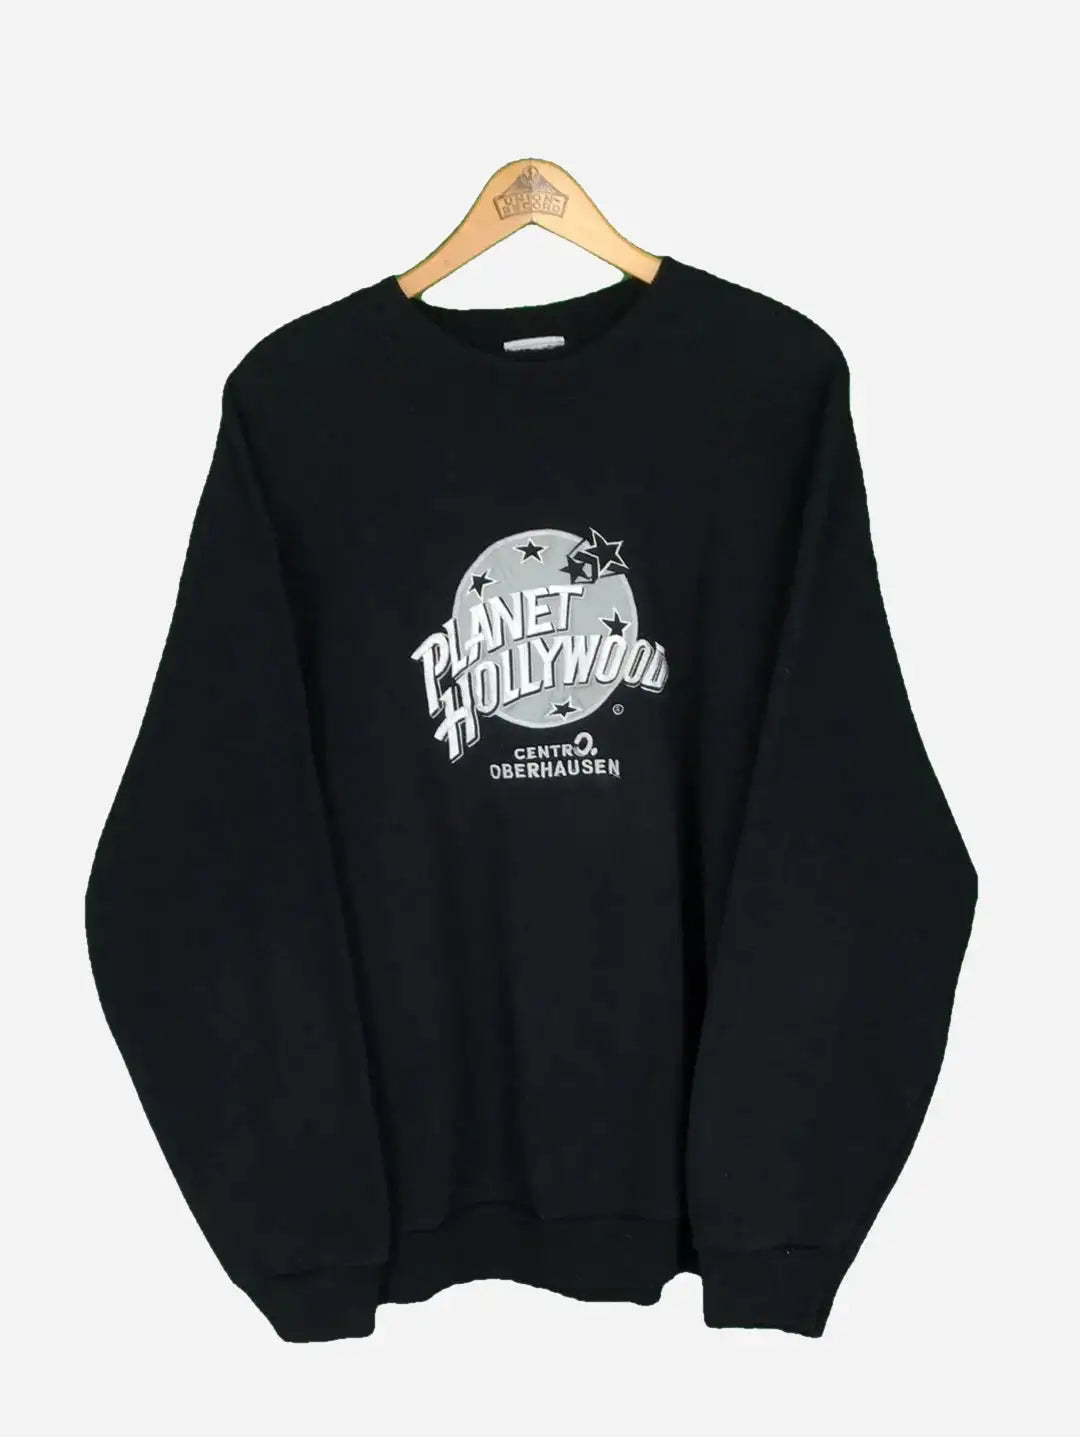 Planet Hollywood Sweater (XL)